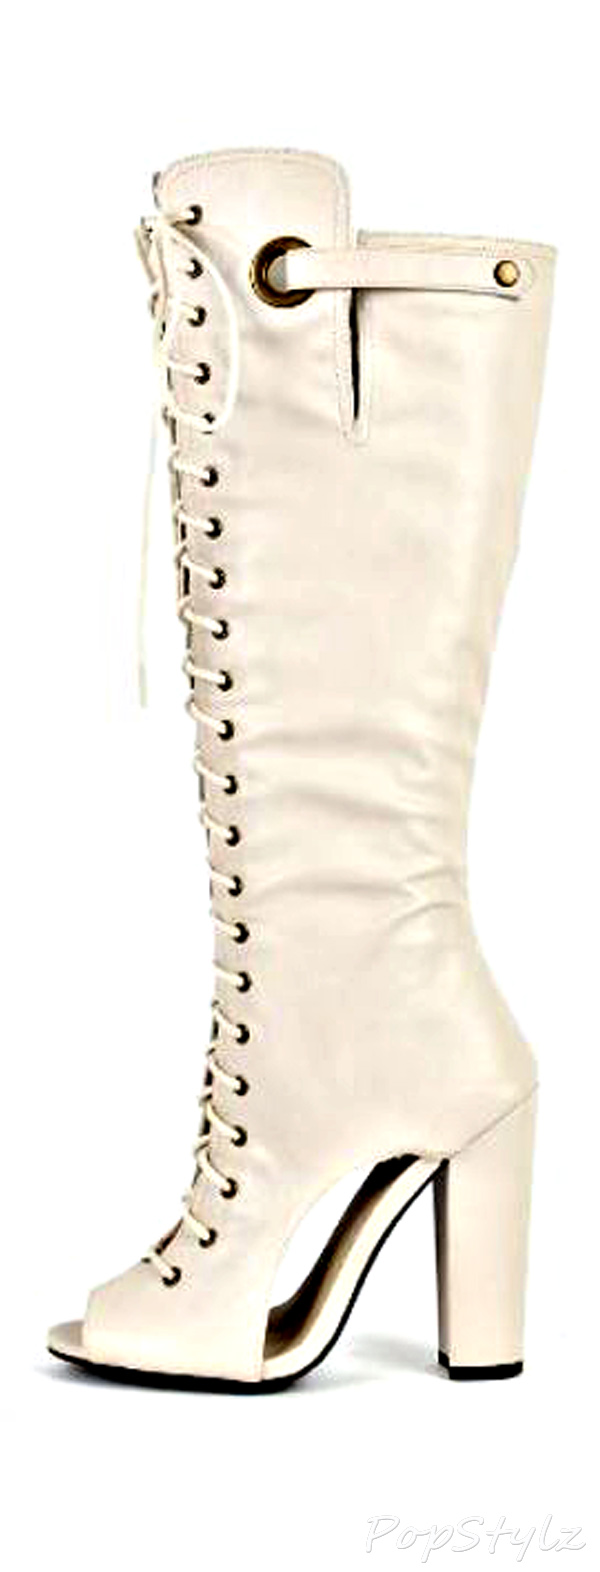 Qupid Immortal-41 Lace Up Cut Out Boots